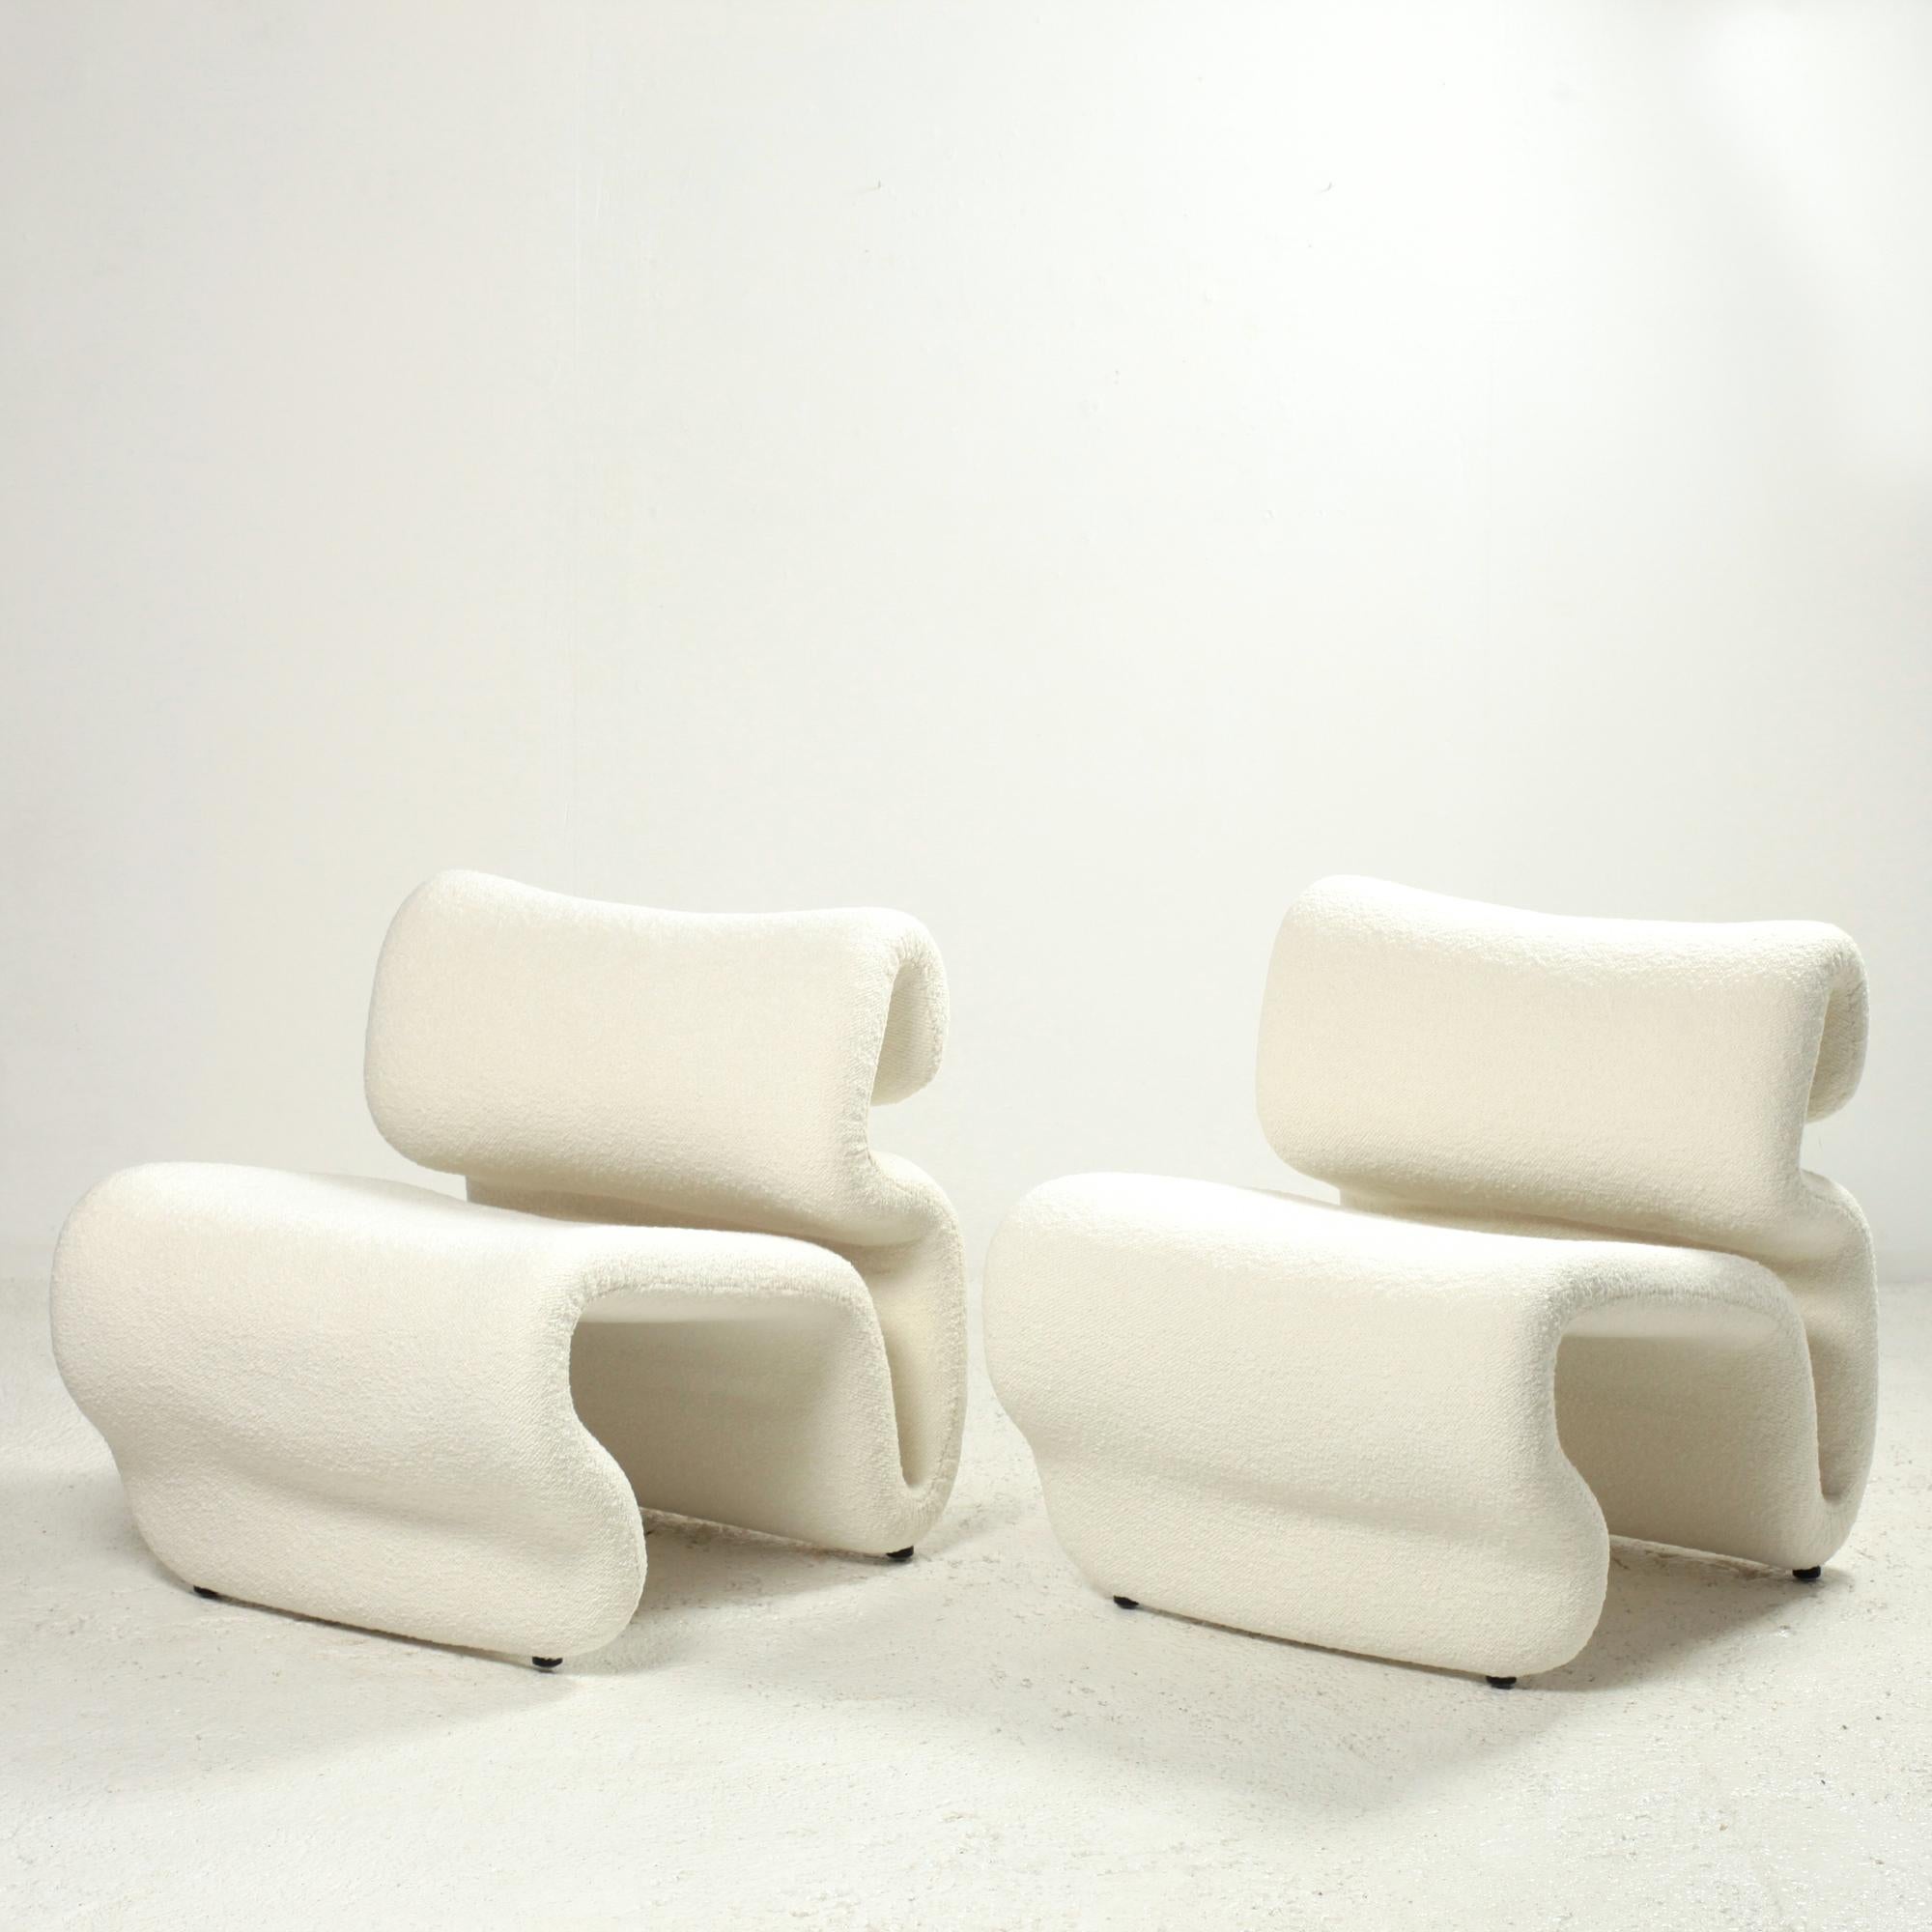 Swedish Pair of Etcetera Easy Chair by Jan Ekselius for JOC Sweden 1970s For Sale